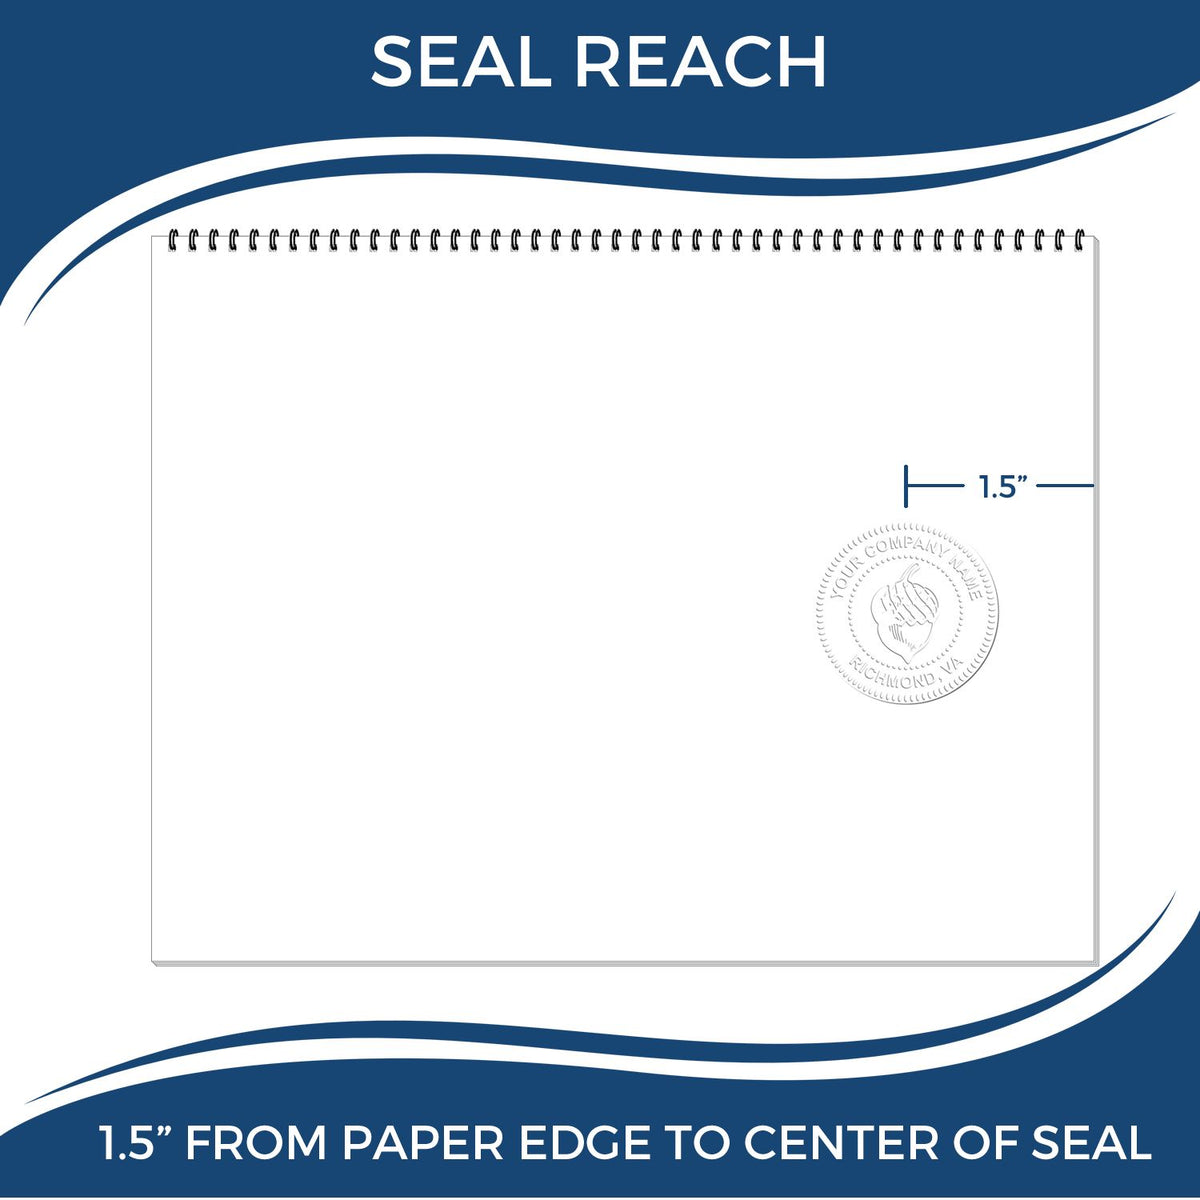 An infographic showing the seal reach which is represented by a ruler and a miniature seal image of the Hybrid Mississippi Engineer Seal